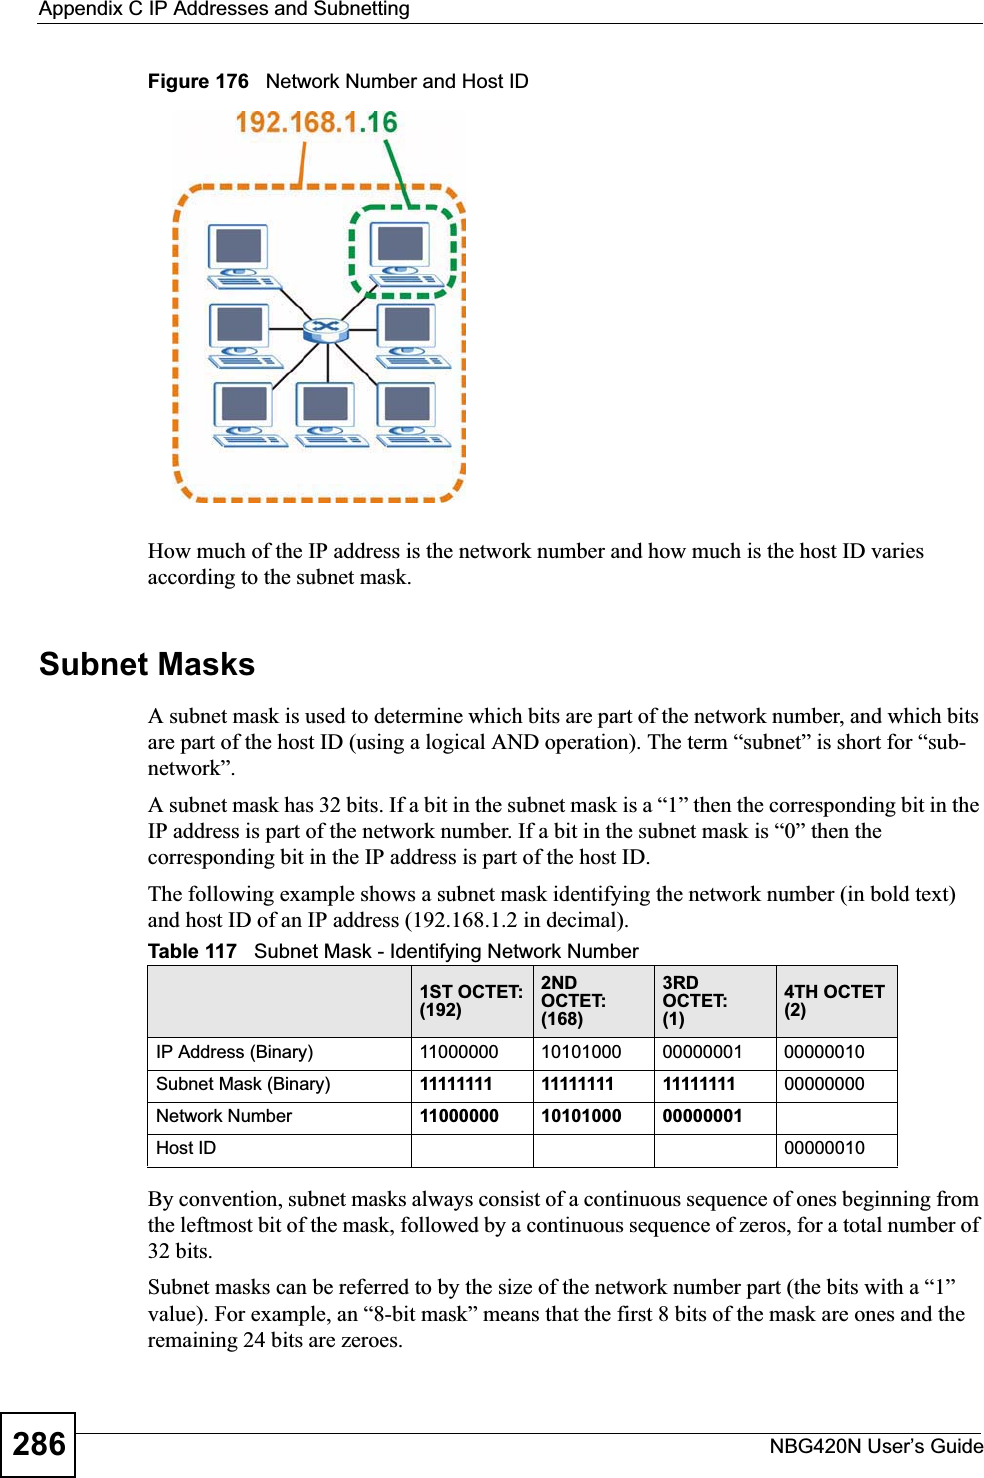 Appendix C IP Addresses and SubnettingNBG420N User’s Guide286Figure 176   Network Number and Host IDHow much of the IP address is the network number and how much is the host ID varies according to the subnet mask. Subnet MasksA subnet mask is used to determine which bits are part of the network number, and which bits are part of the host ID (using a logical AND operation). The term “subnet” is short for “sub-network”.A subnet mask has 32 bits. If a bit in the subnet mask is a “1” then the corresponding bit in the IP address is part of the network number. If a bit in the subnet mask is “0” then the corresponding bit in the IP address is part of the host ID. The following example shows a subnet mask identifying the network number (in bold text) and host ID of an IP address (192.168.1.2 in decimal).By convention, subnet masks always consist of a continuous sequence of ones beginning from the leftmost bit of the mask, followed by a continuous sequence of zeros, for a total number of 32 bits.Subnet masks can be referred to by the size of the network number part (the bits with a “1” value). For example, an “8-bit mask” means that the first 8 bits of the mask are ones and the remaining 24 bits are zeroes.Table 117   Subnet Mask - Identifying Network Number1ST OCTET:(192)2ND OCTET:(168)3RD OCTET:(1)4TH OCTET(2)IP Address (Binary) 11000000 10101000 00000001 00000010Subnet Mask (Binary) 11111111 11111111 11111111 00000000Network Number 11000000 10101000 00000001Host ID 00000010